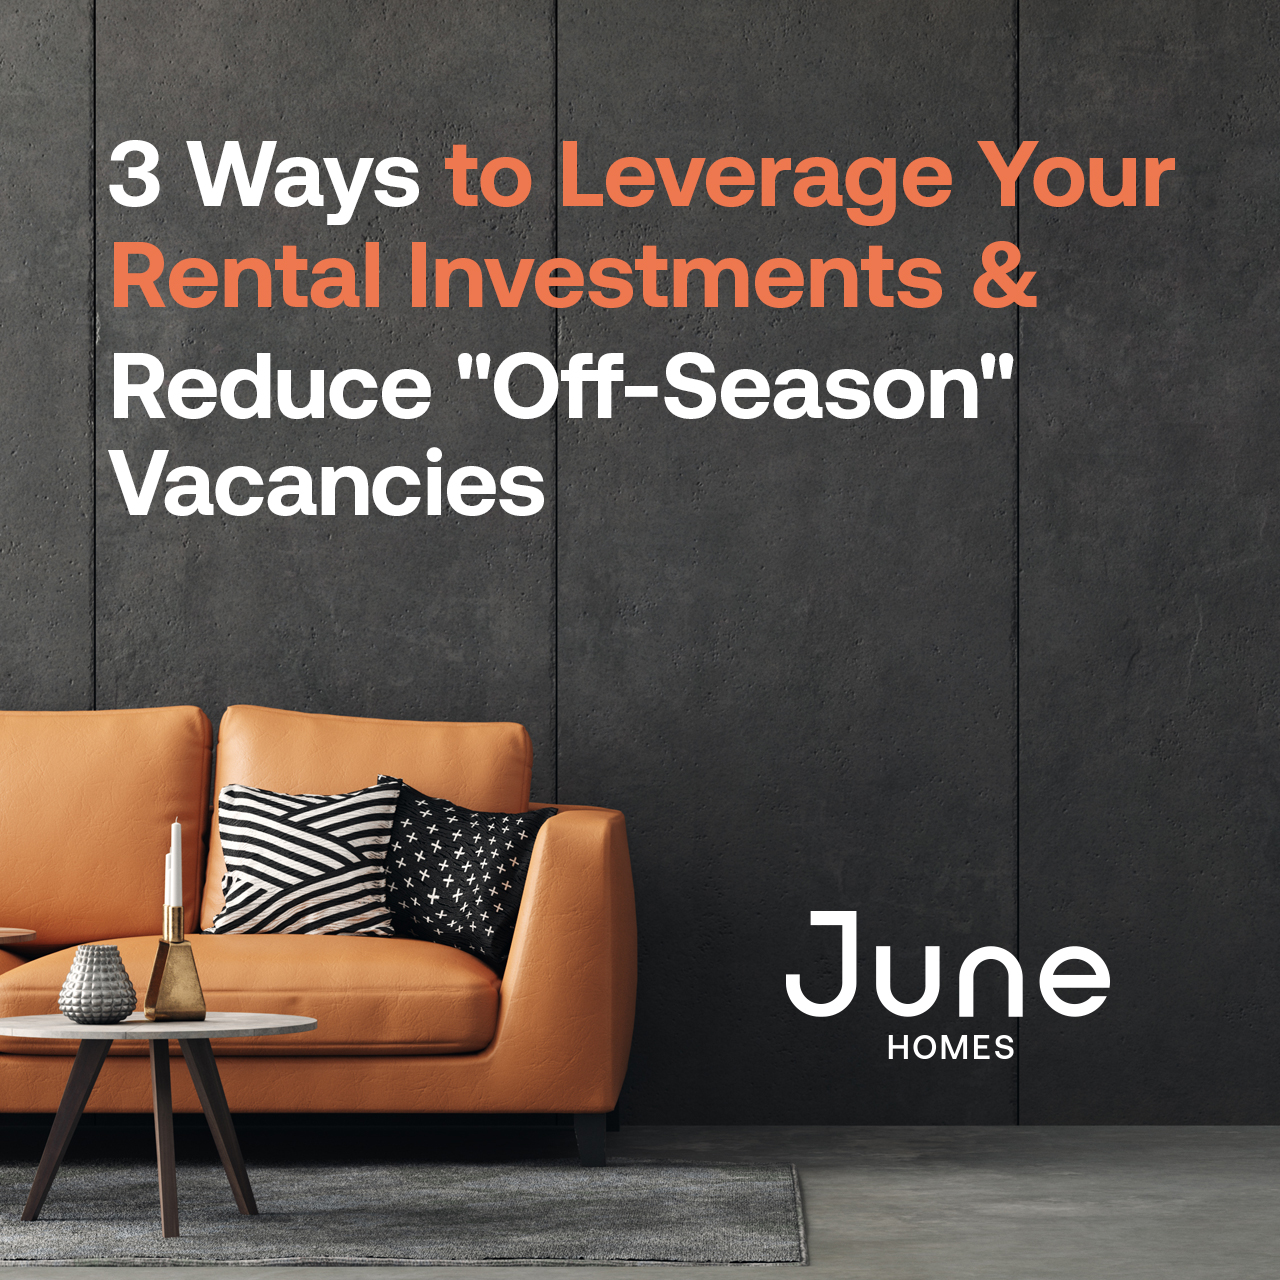 3 Ways to Leverage Your Rental Investments & Reduce “Off-Season” Vacancies